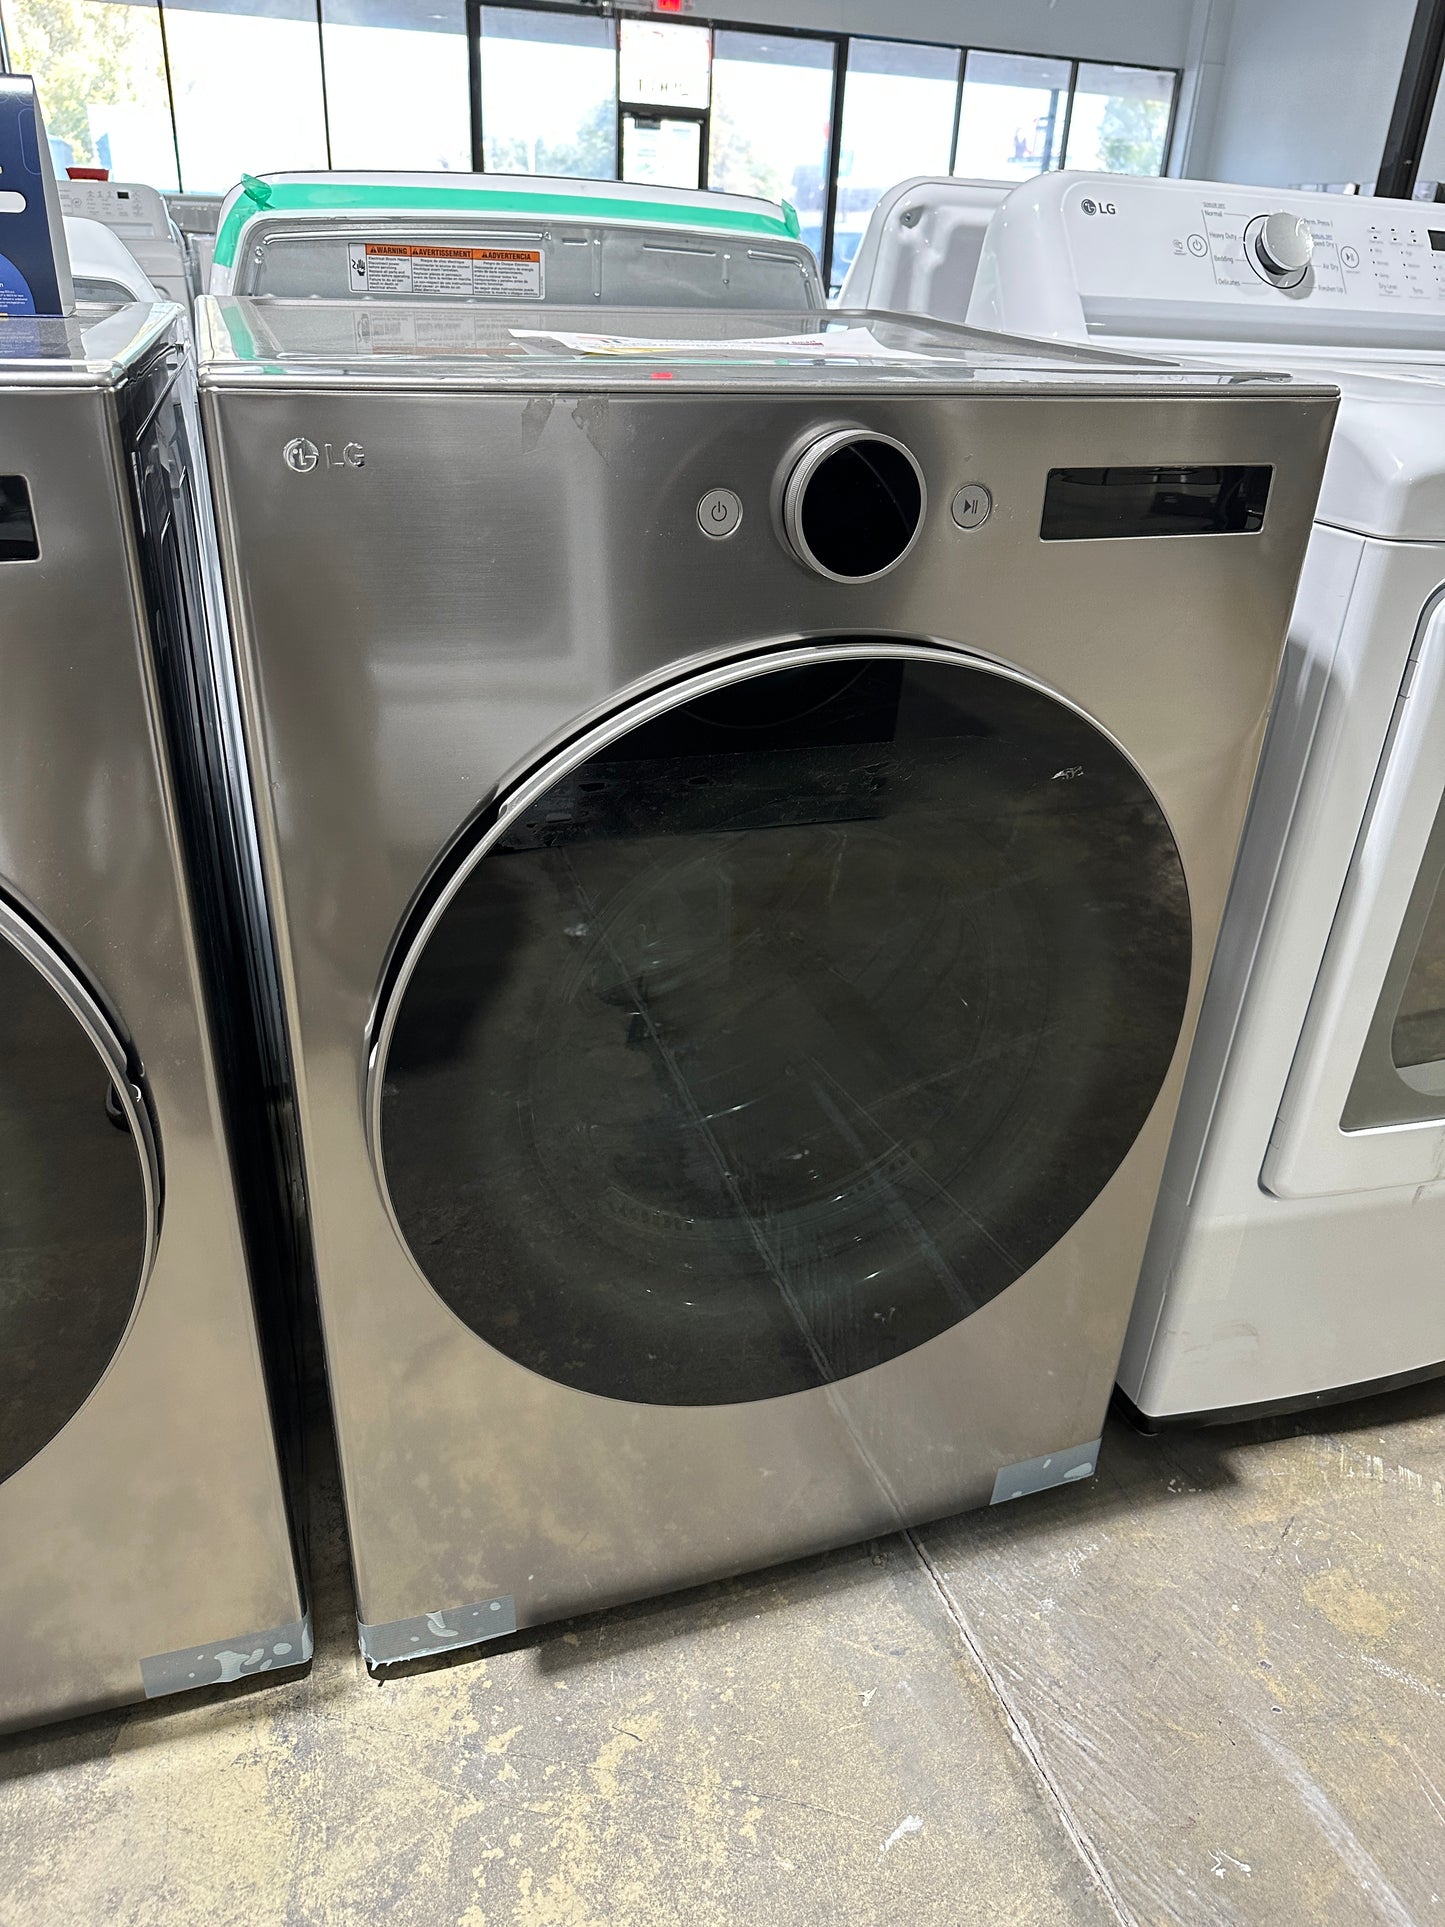 REDUCED PRICE Electric Dryer with Steam and Sensor Dry - Graphite Steel  Model:DLEX5500V  DRY11747S